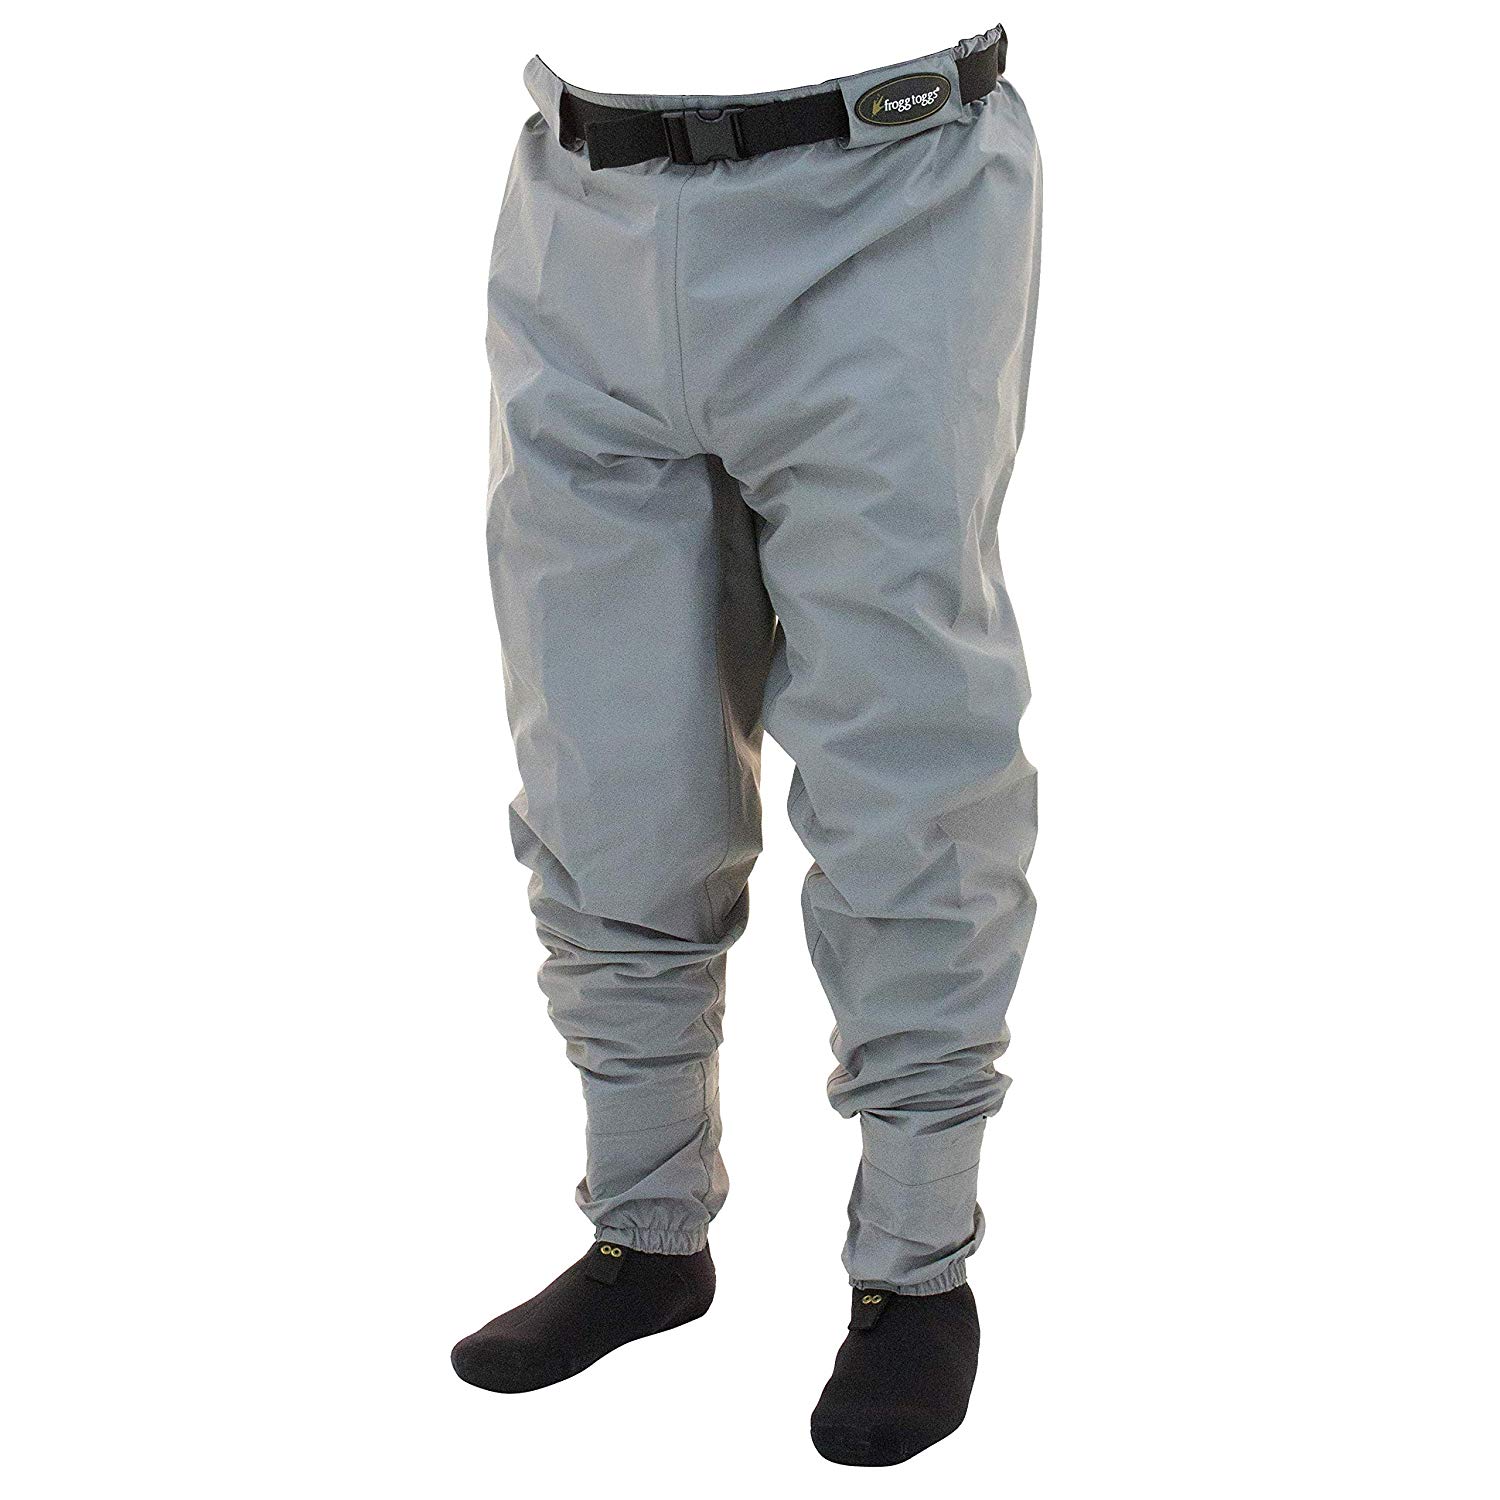 Amazon Frogg Toggs Hellbender Stockingfoot Guide Pant Clothing